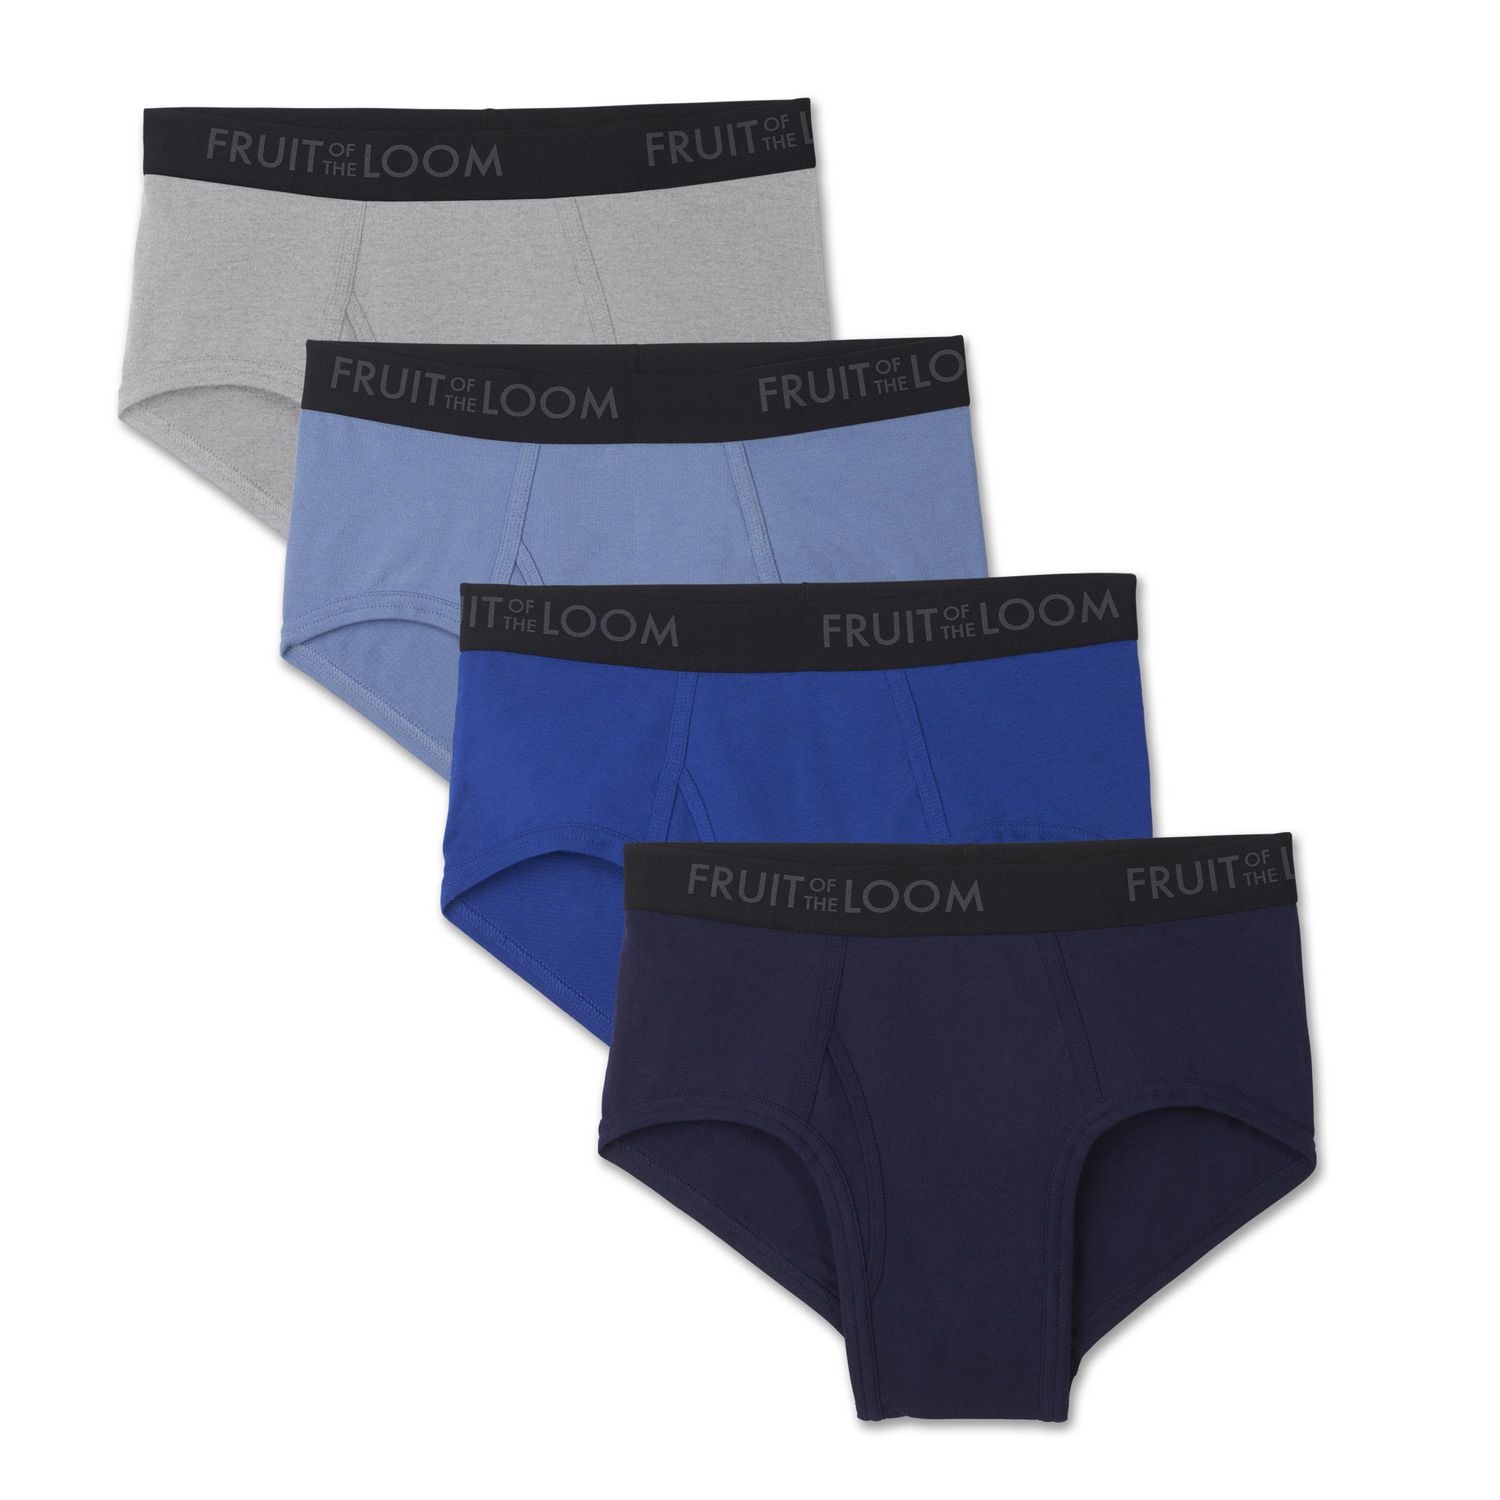 Fruit of the Loom Mens 3-Pack Premium Breathable Cotton Micromesh